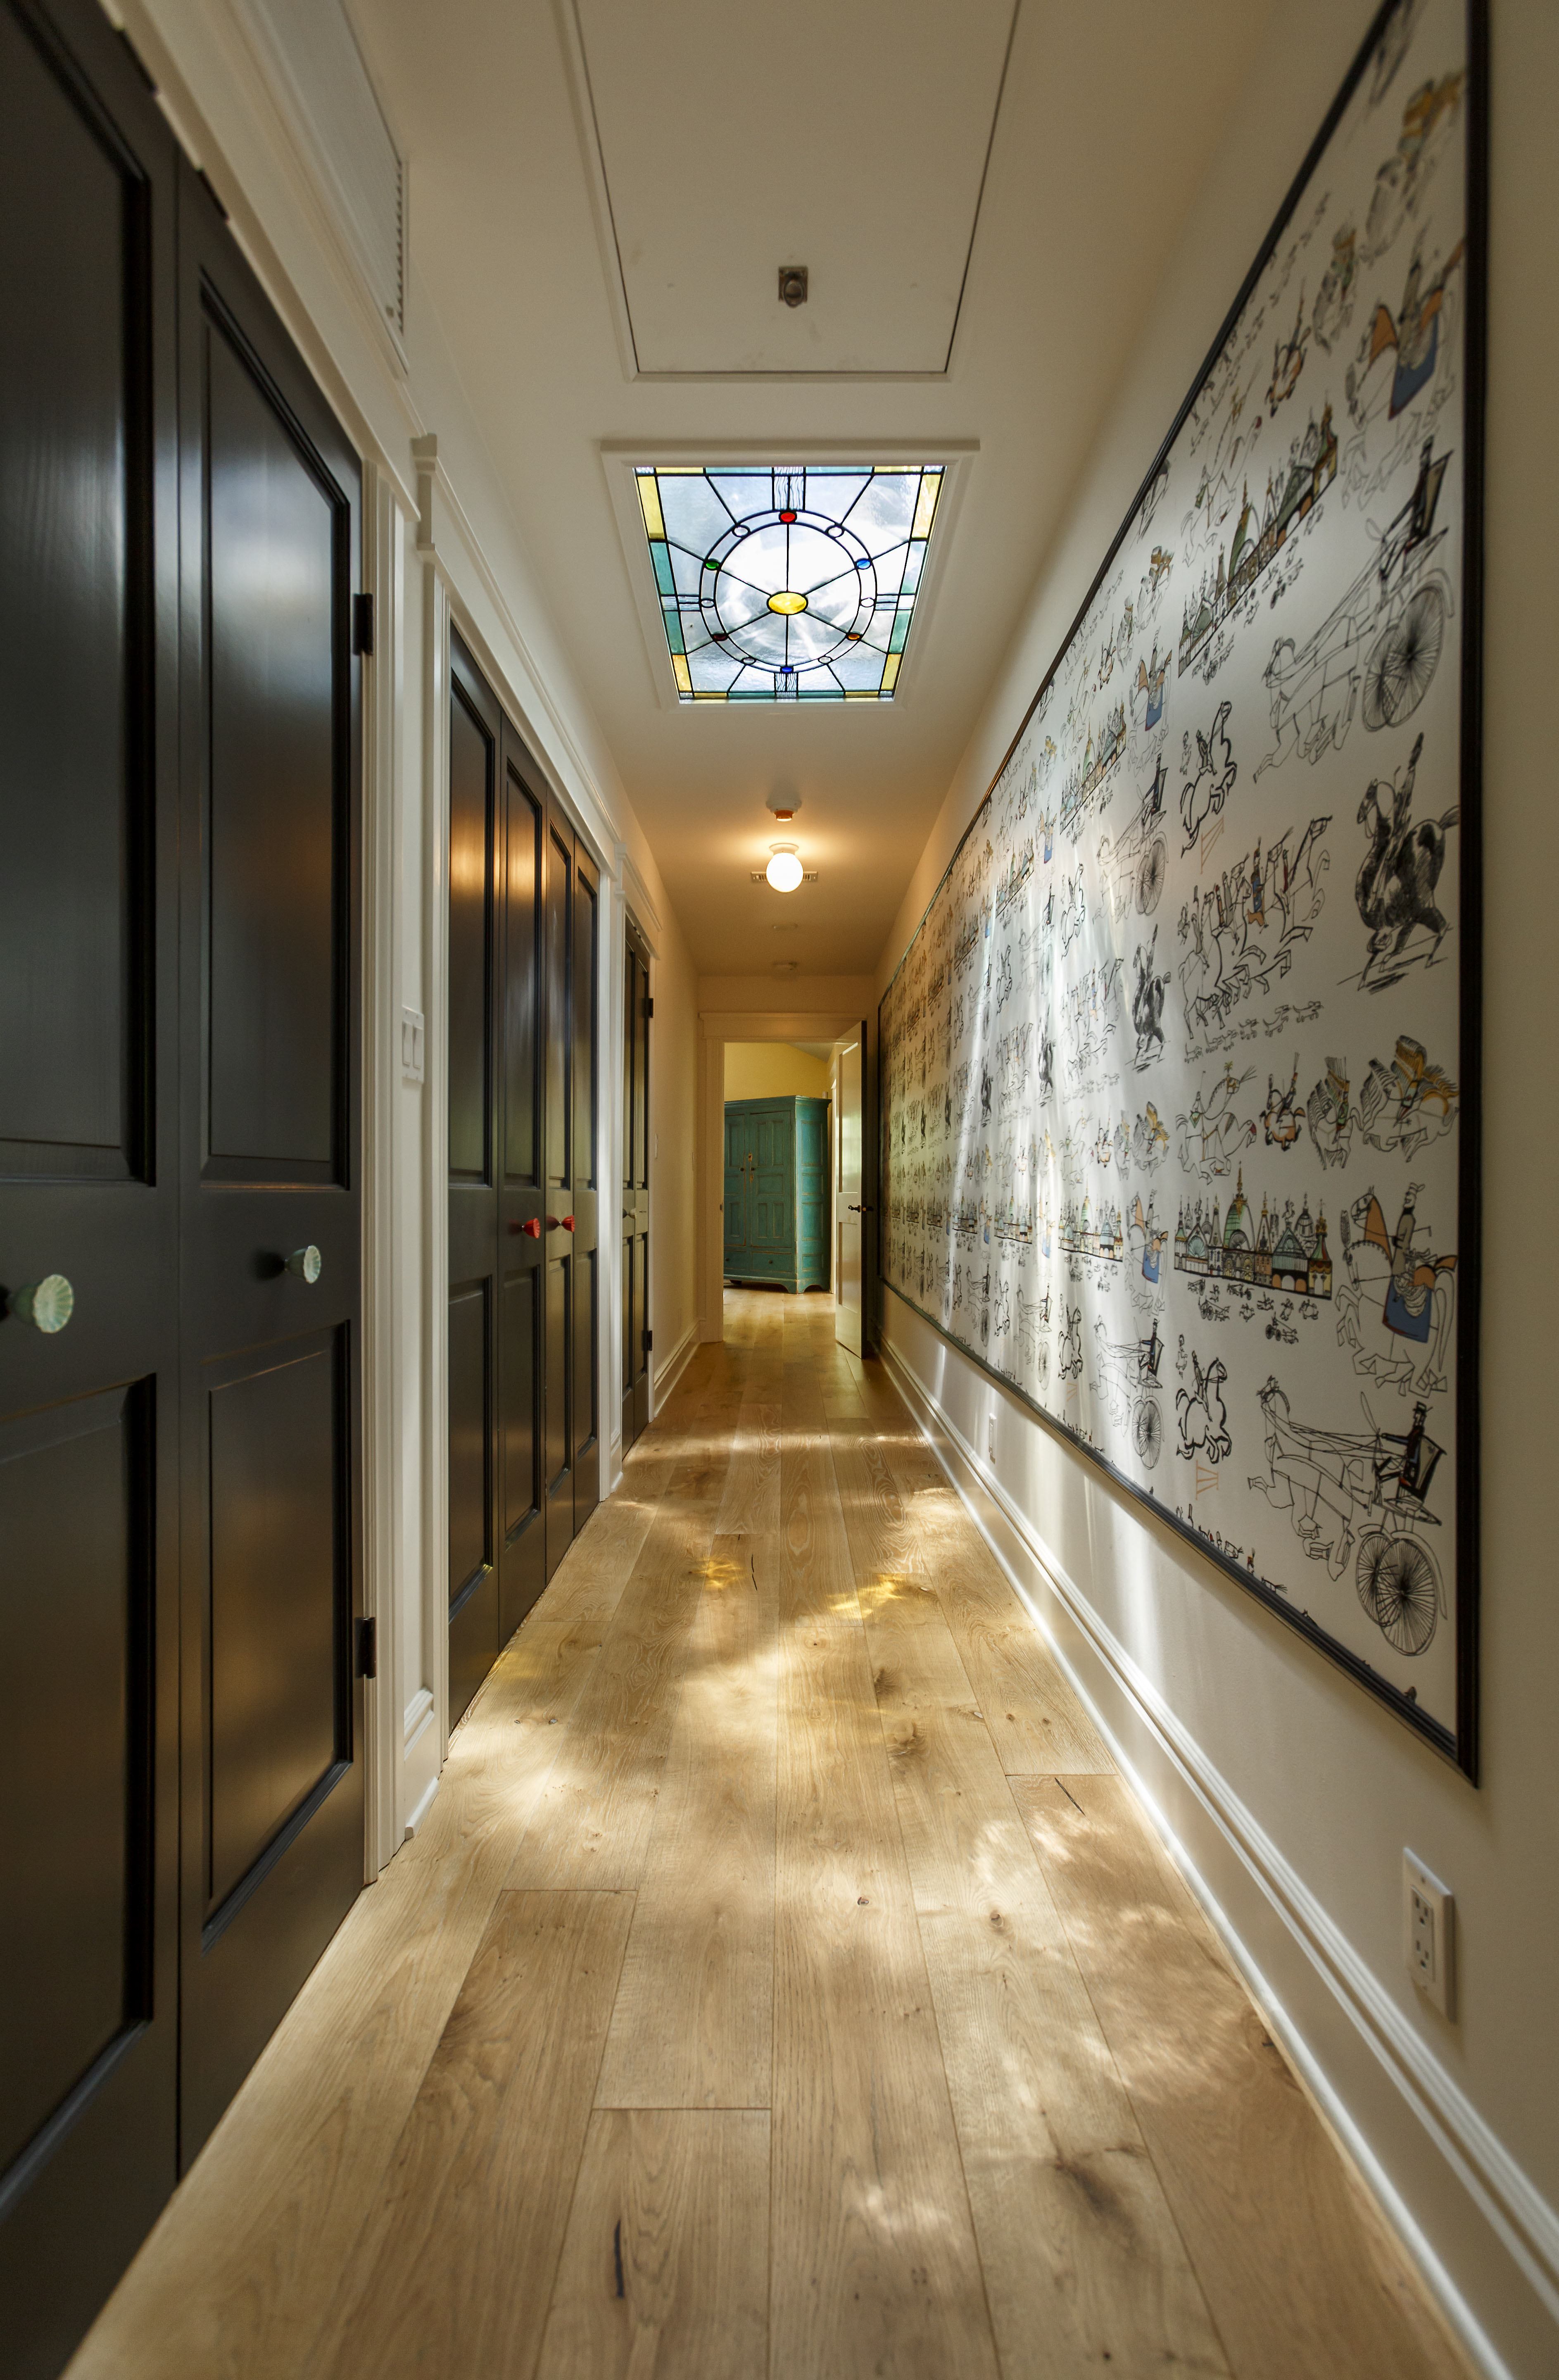 The hallway with stained-glass skylight, connecting the dining room to the bedroom at the recently renovated Craftsman home of Linda Hunt, on September 19, 2014 | Source: Getty Images